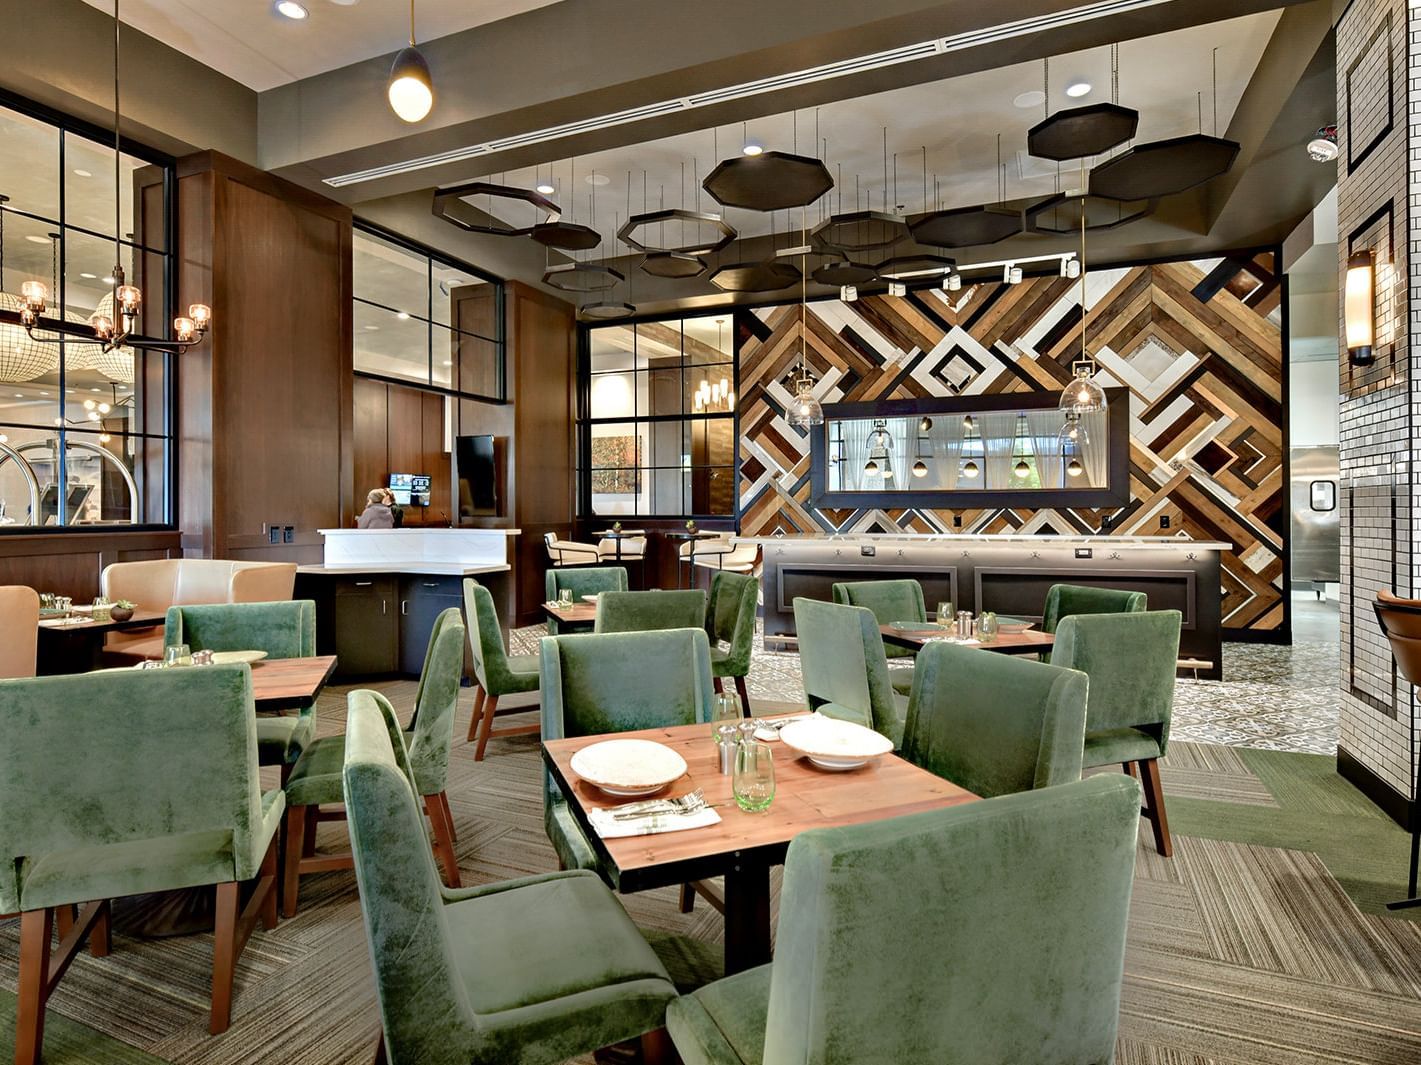 View of a dining area in Trillium restaurant at The Grove Hotel